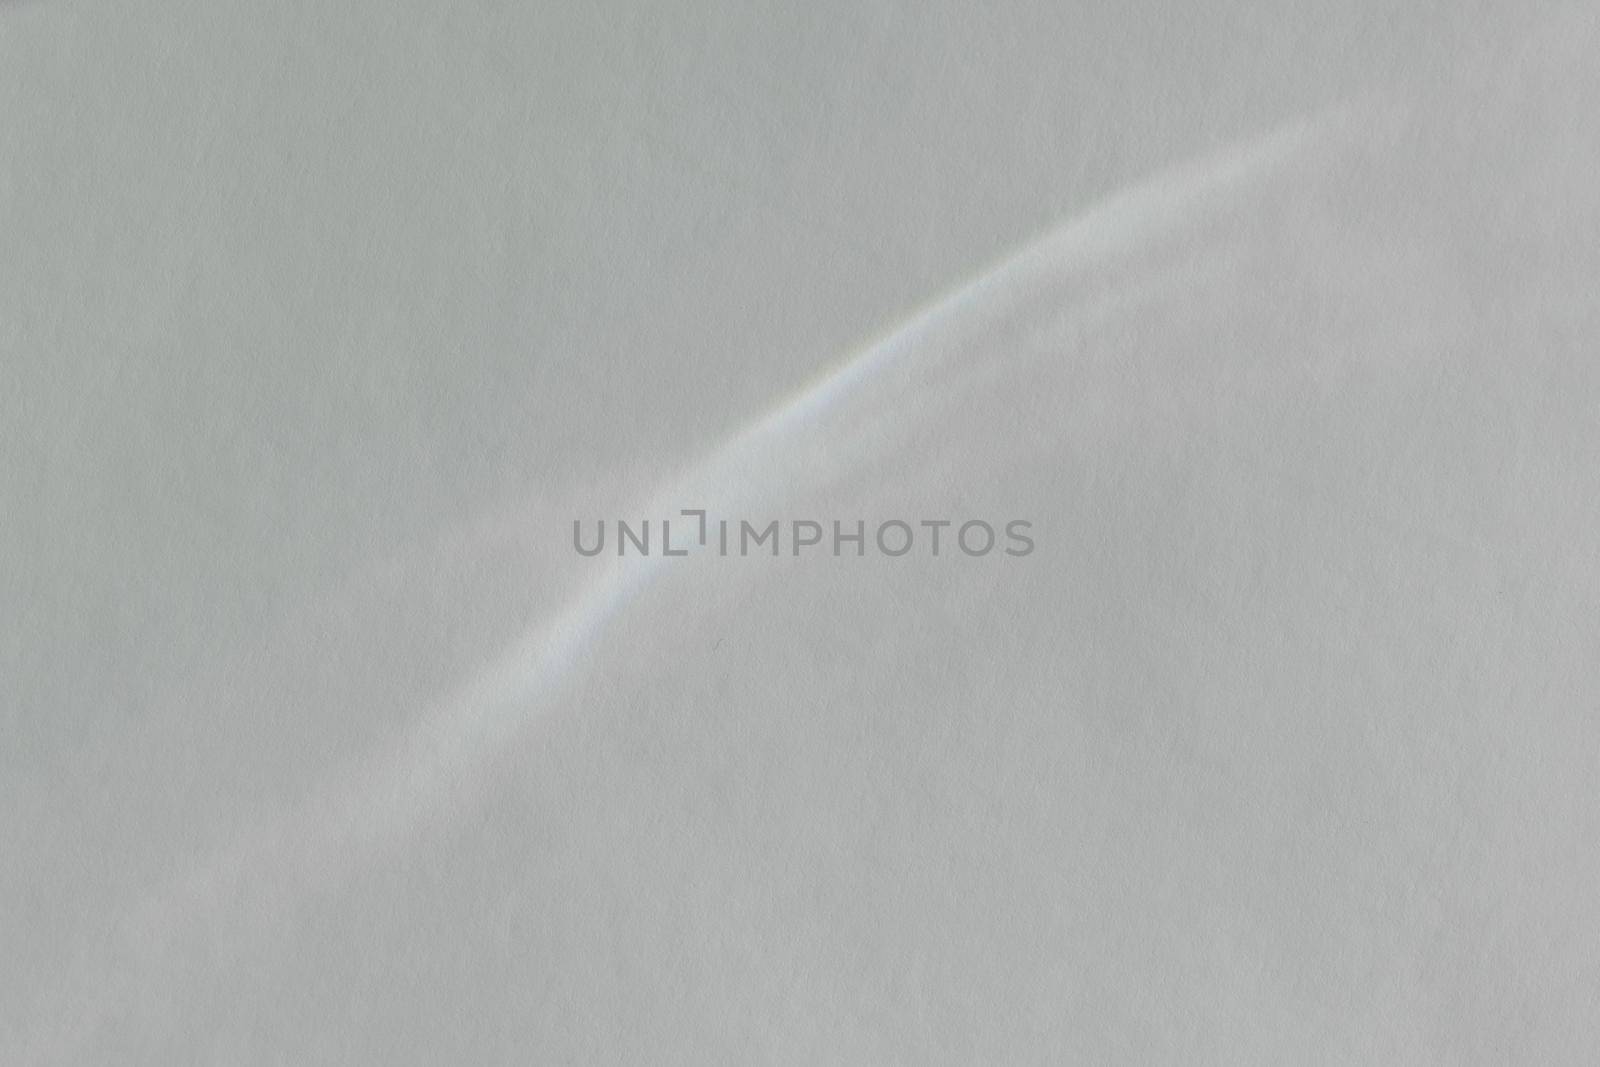 Caustic effect light refraction on white wall overlay photo mockup, blurred sun rays refracting through glass prism with shadow. Abstract natural light refraction silhouette on water surface mock up.